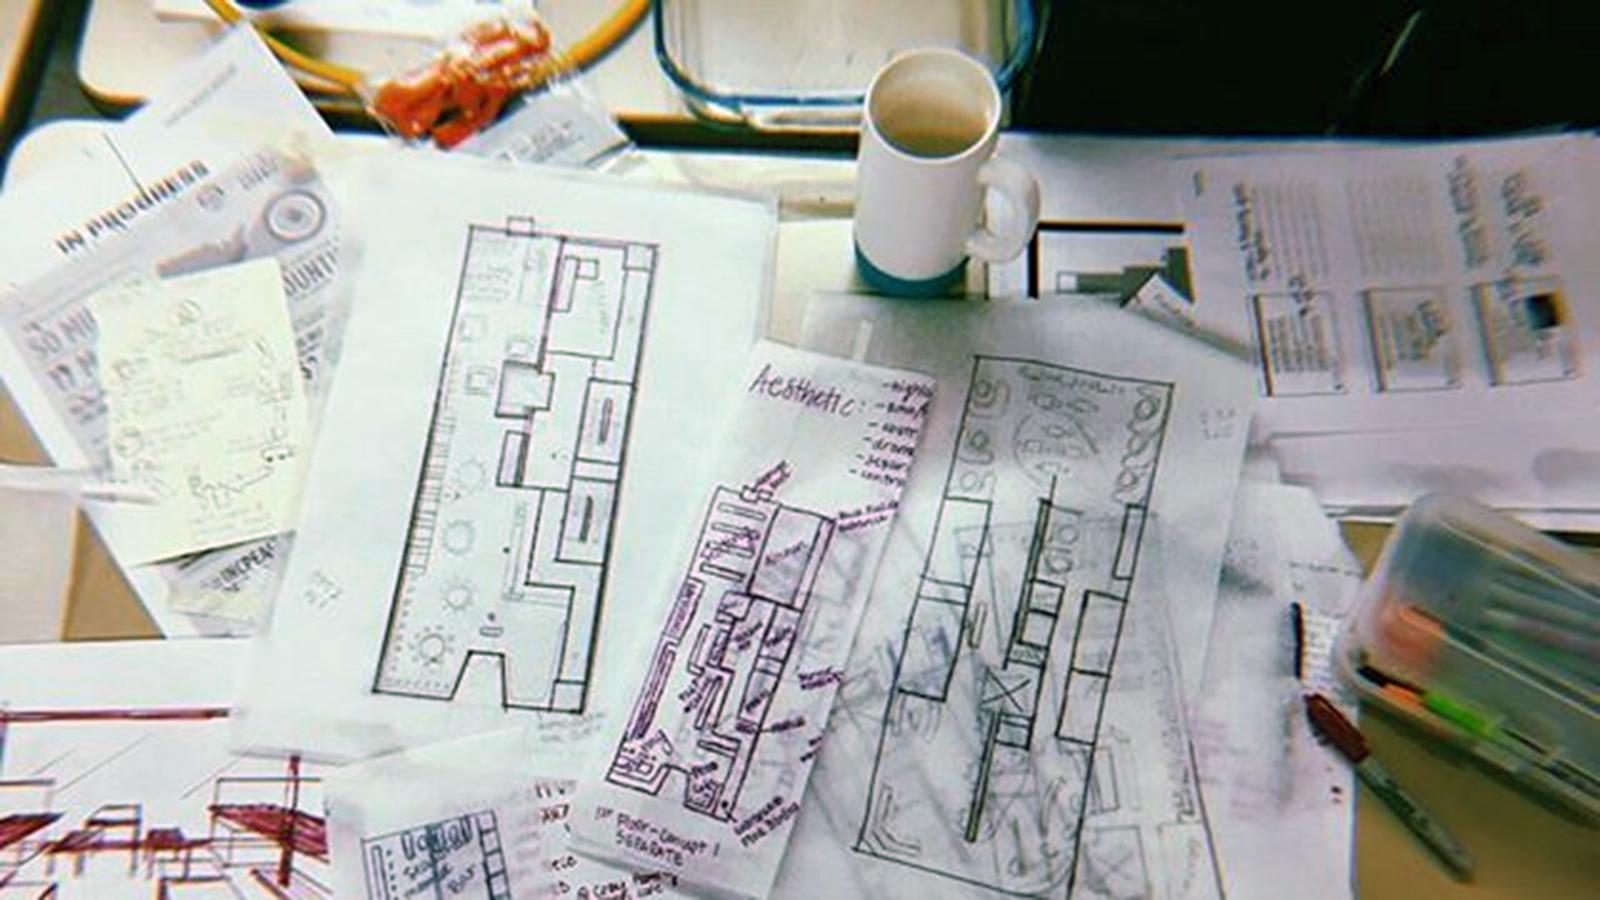 Interior Design drawings on a desk